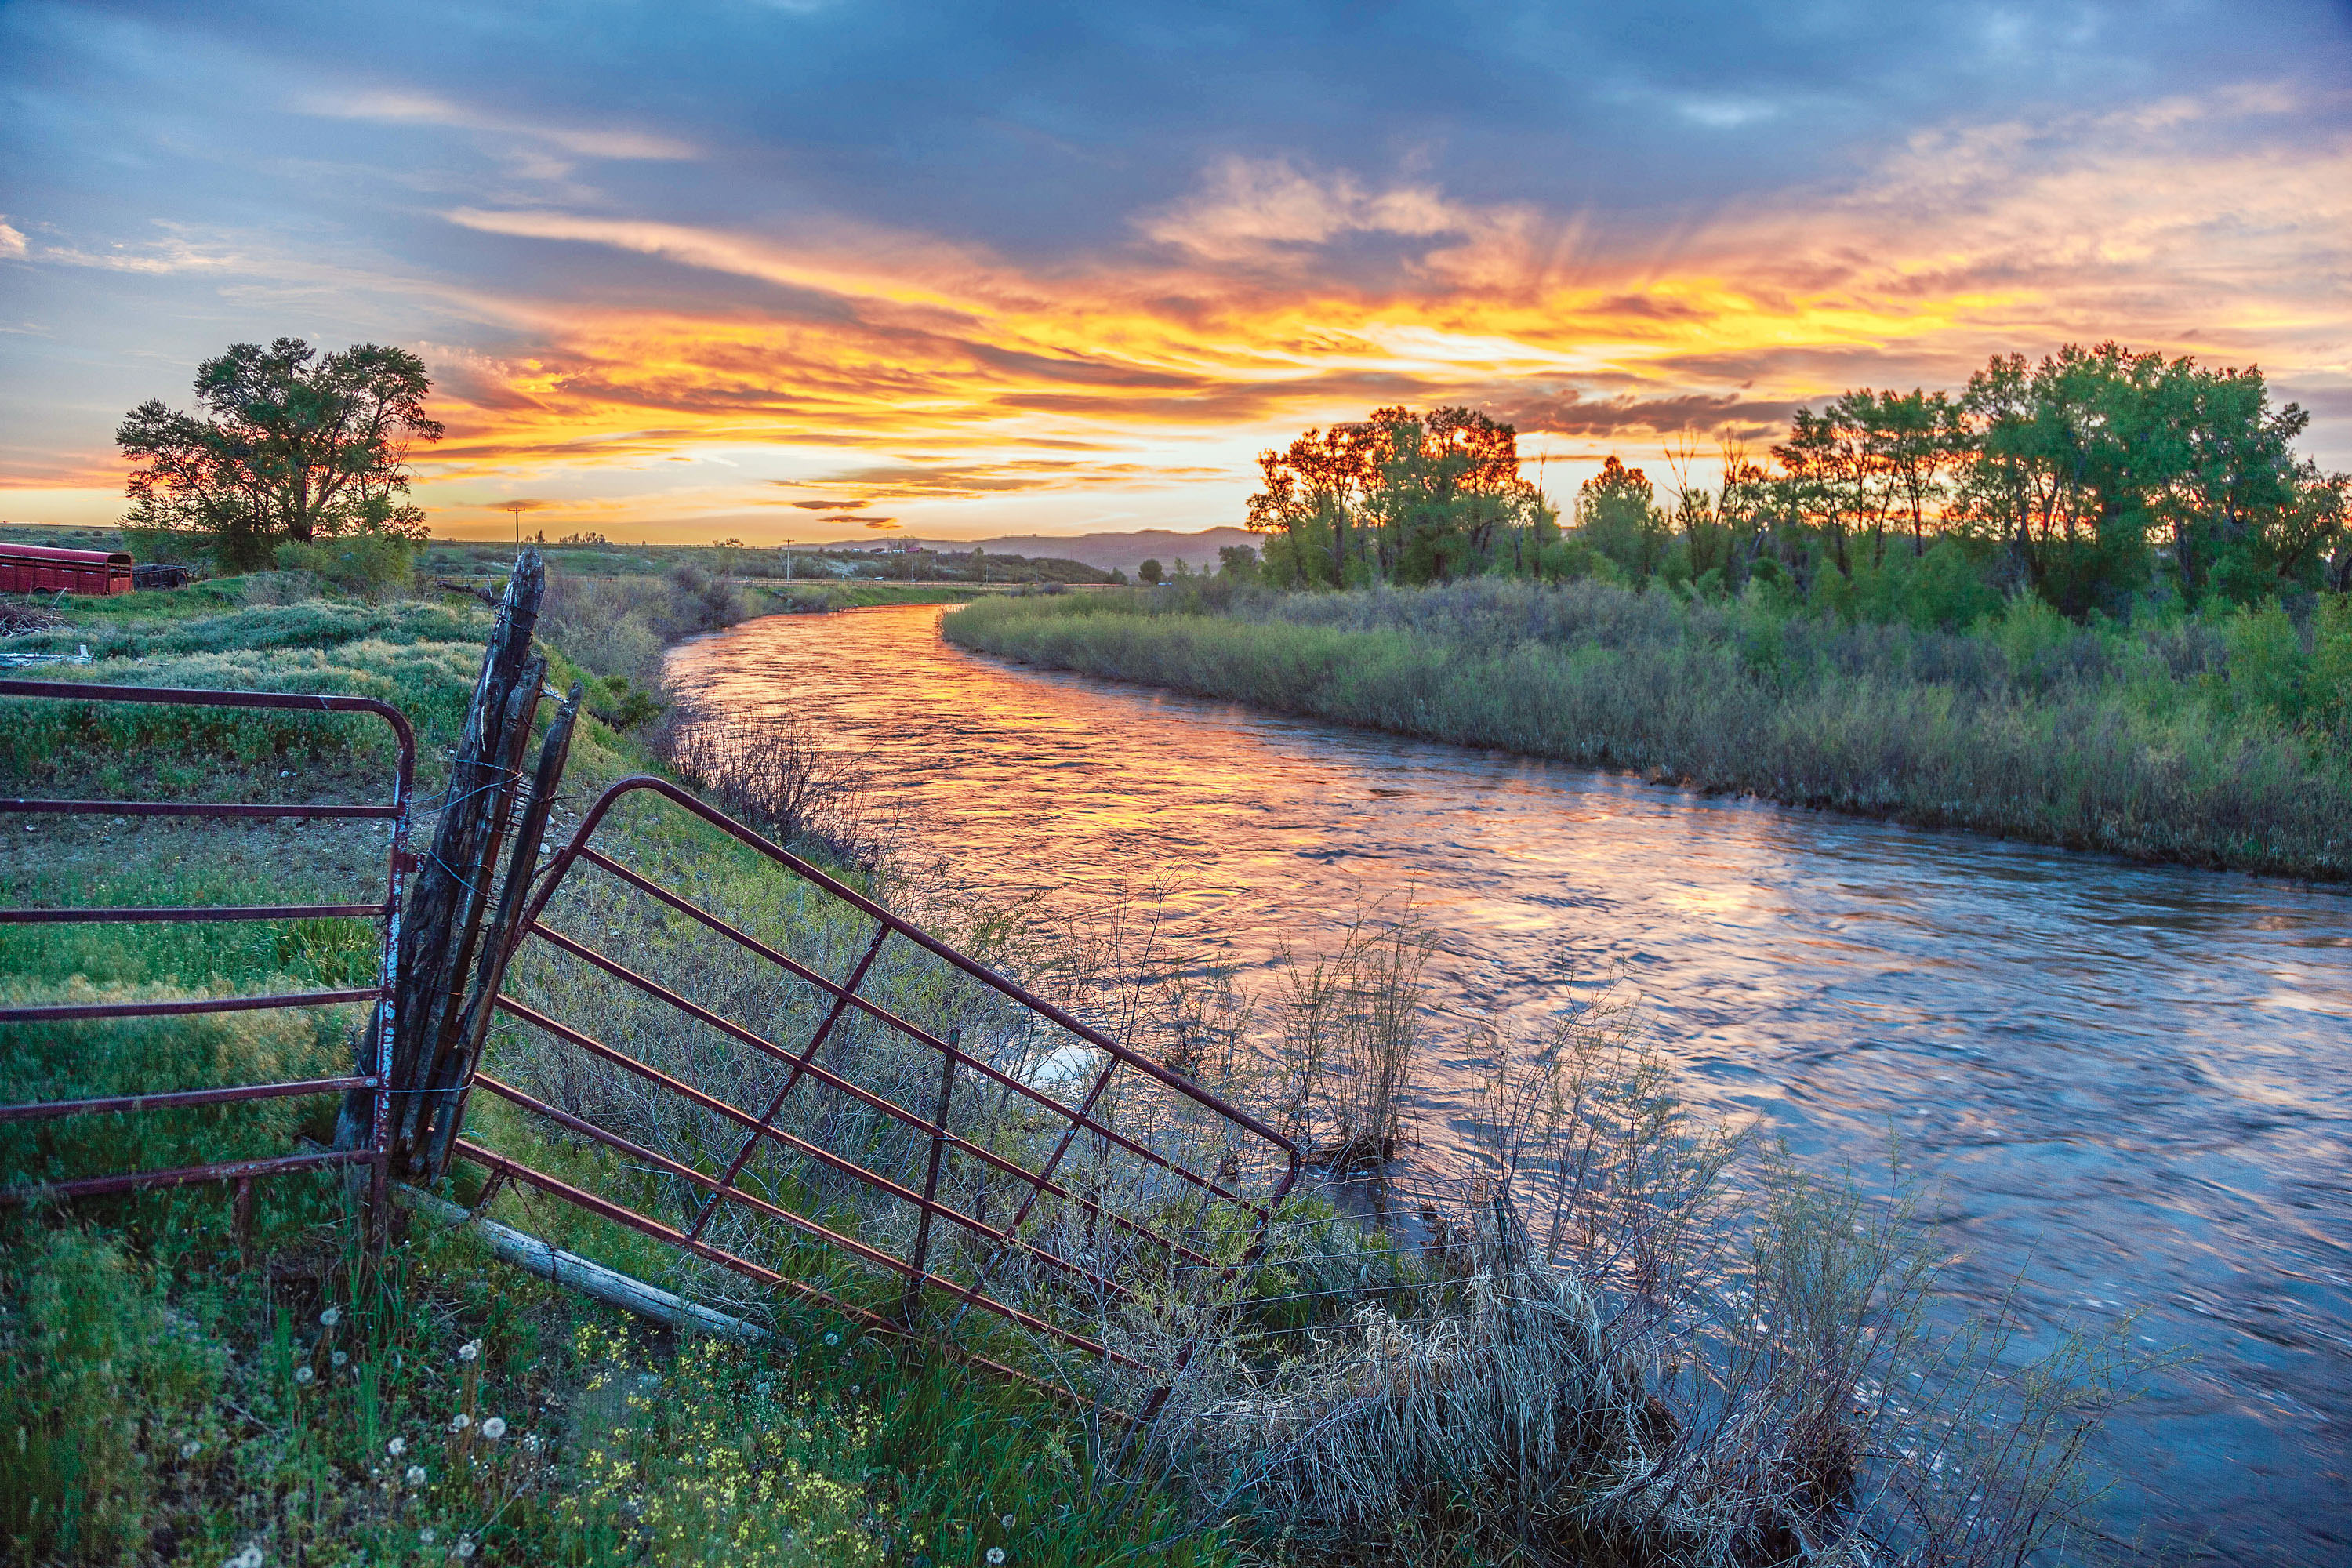 A river flowing through marsh with a bright sunset reflecting on the river.